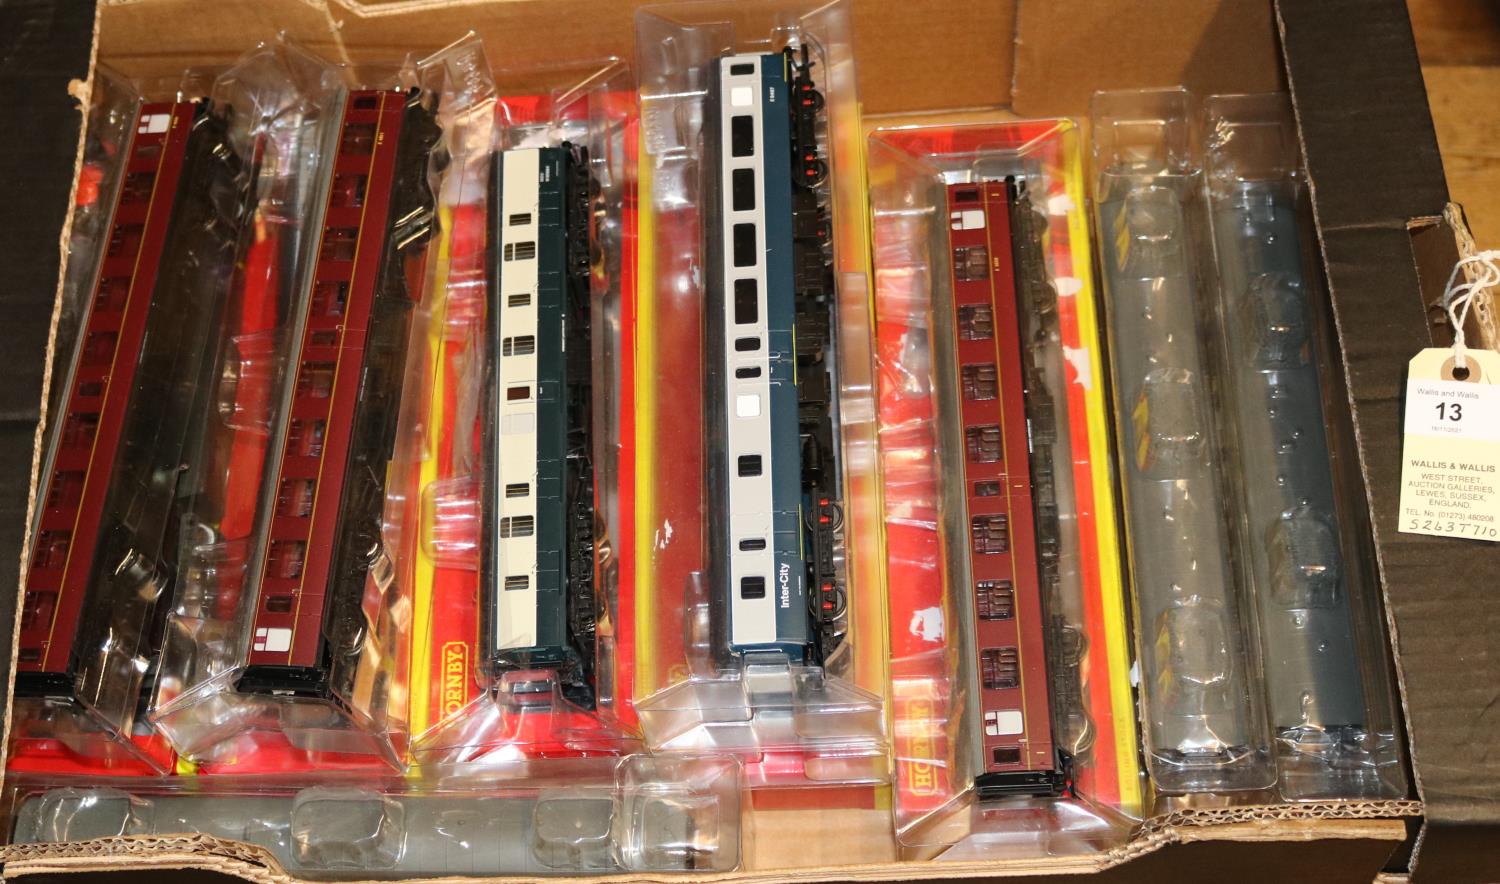 17 Hornby 'OO' gauge Passenger Coaches. Including 7x BR Mk 1 in maroon. A GWR Collett Corridor Brake